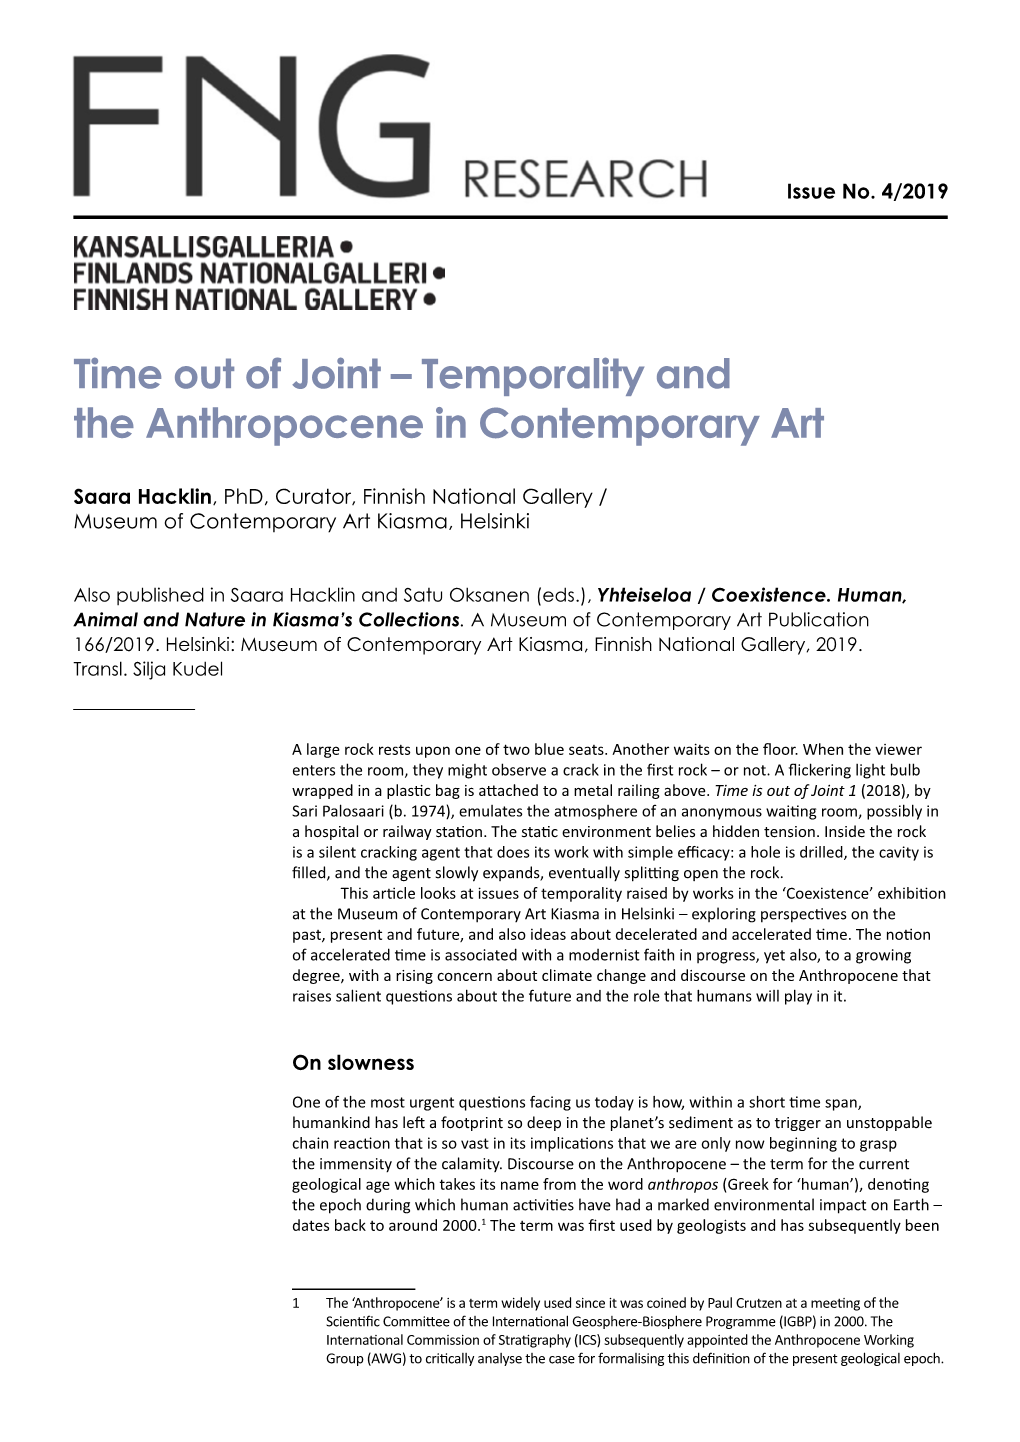 Temporality and the Anthropocene in Contemporary Art